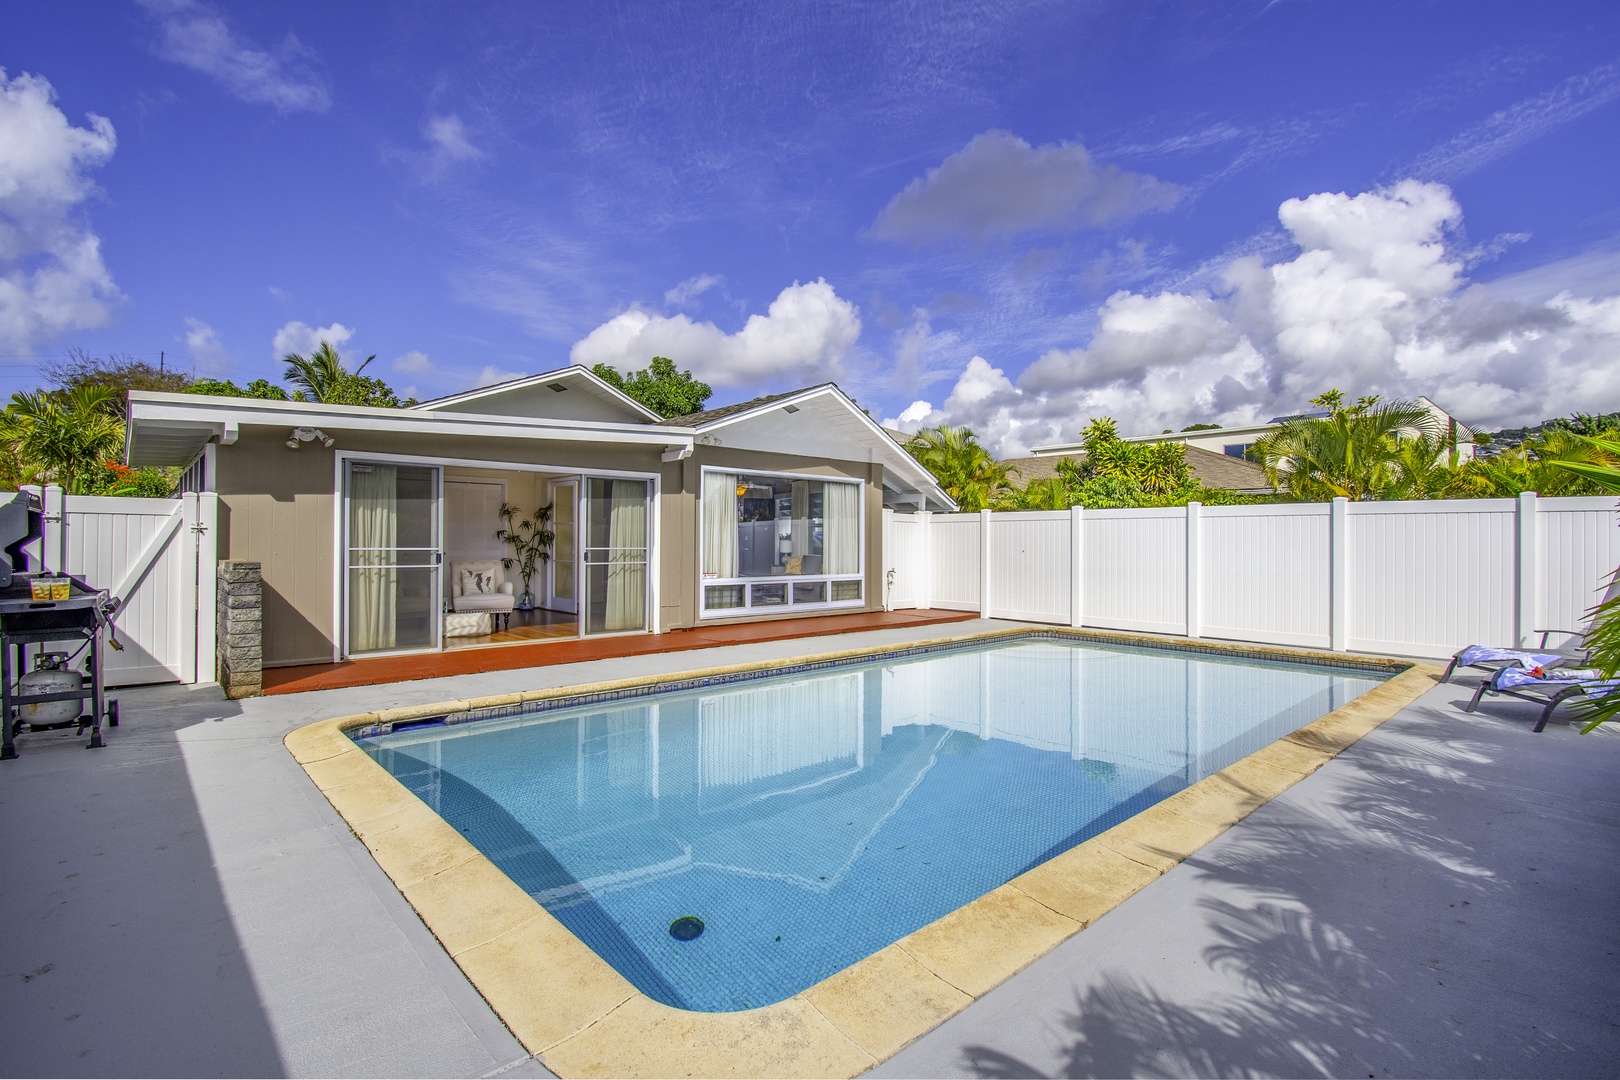 Honolulu Vacation Rentals, Kahala Cottage - Enjoy a relaxing dip in the private pool